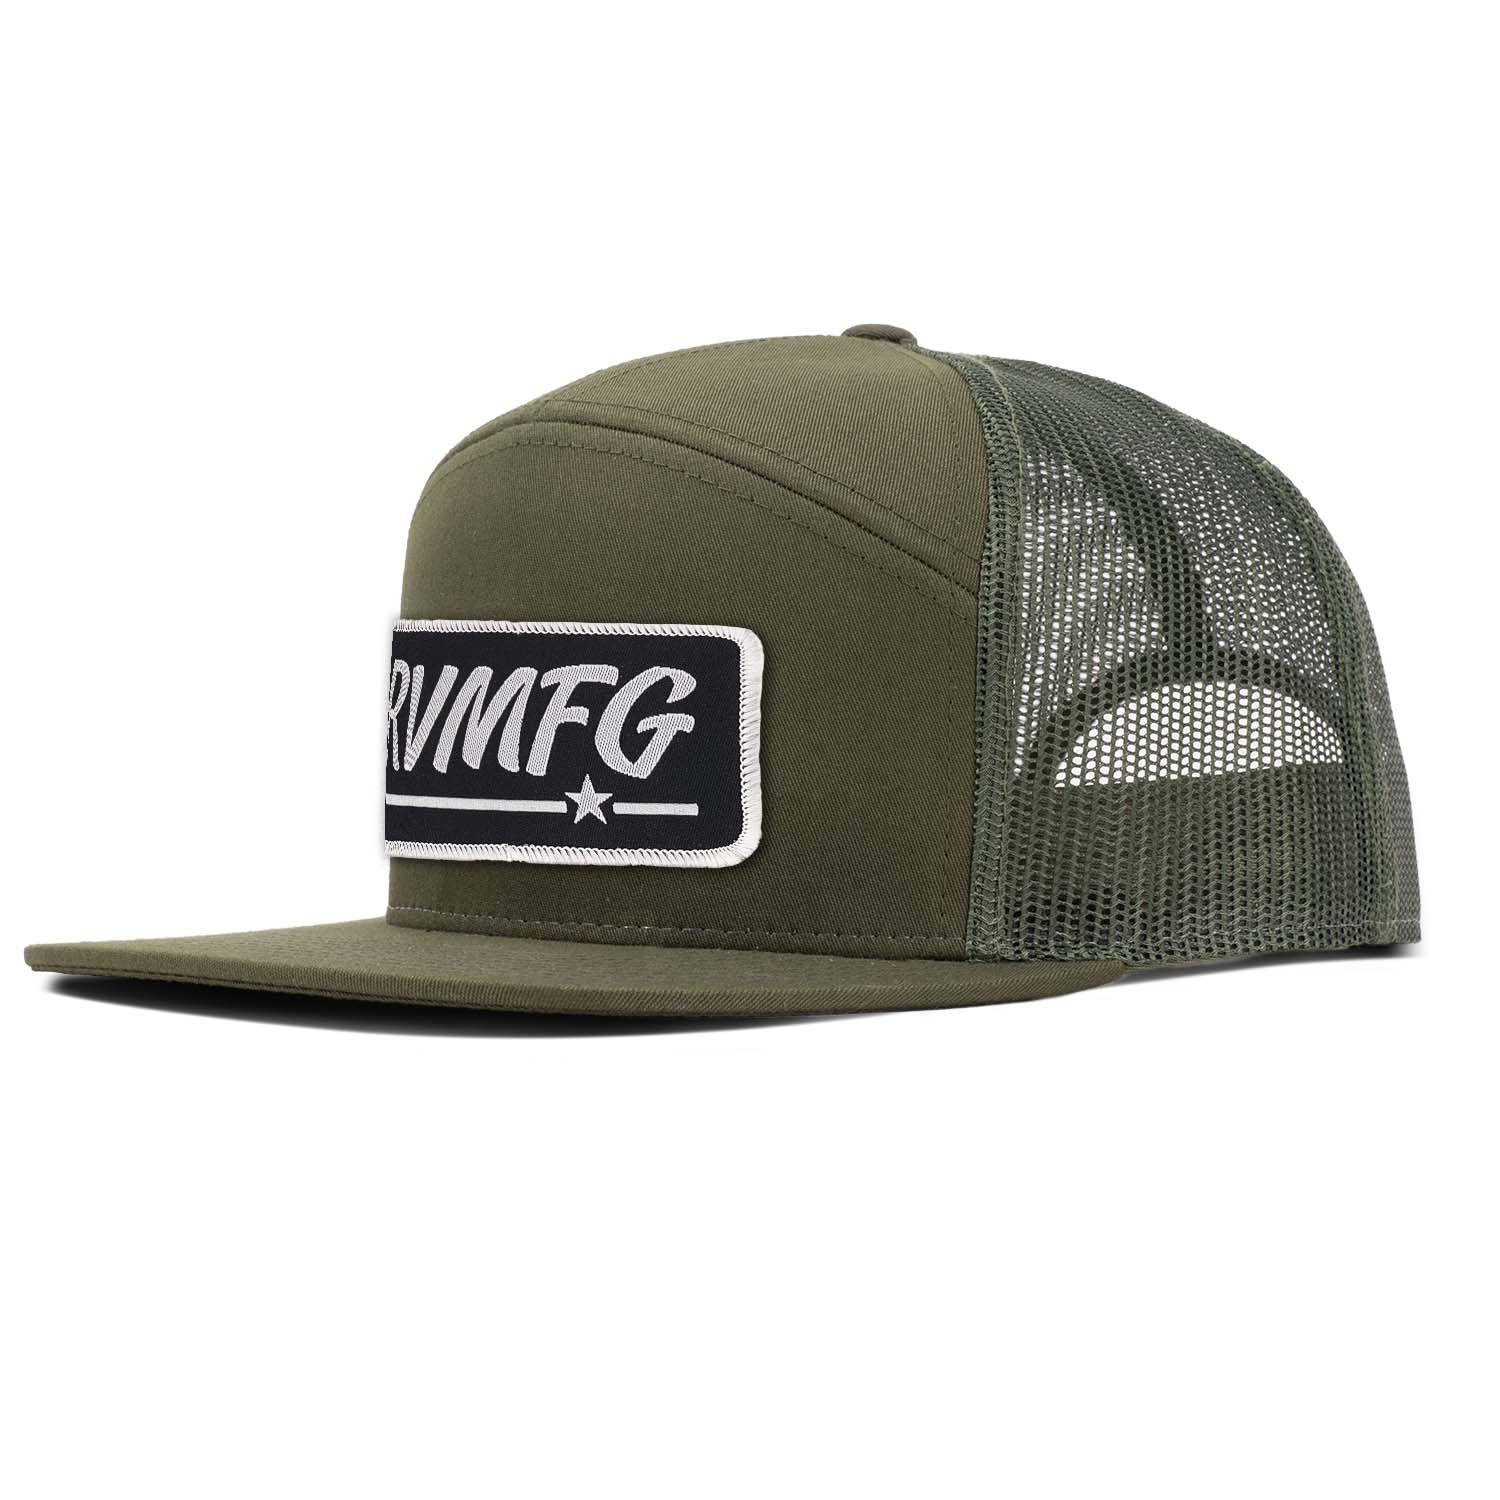 Revolution Mfg all loden green 7 panel flat bill with black RVMFG woven patch with white letters and white border